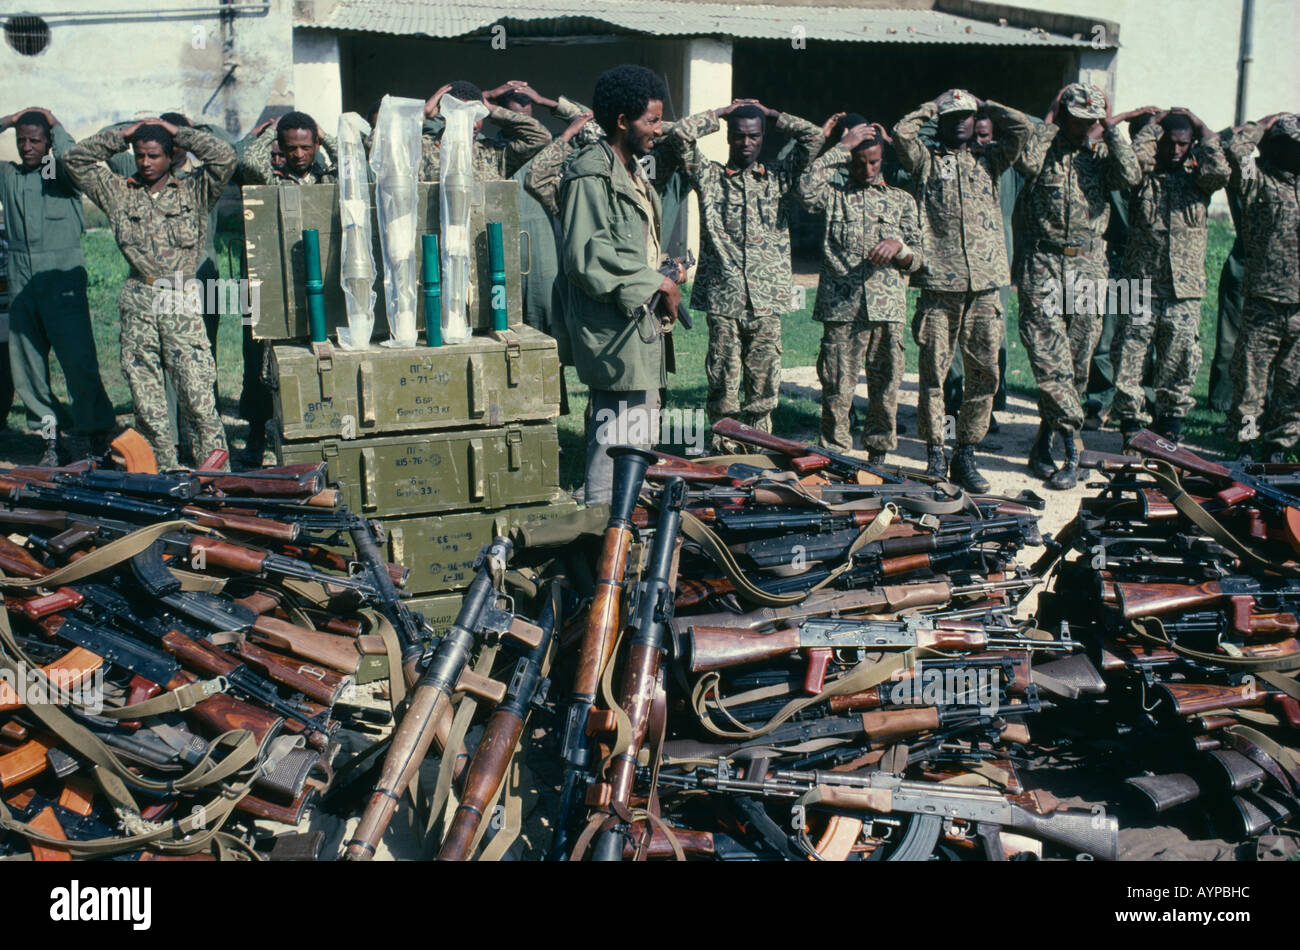 ERITREA Horn Of Africa Military Eritrean People's Liberation Front soldier with prisoners and captured AK-47 Kalashnikov guns Stock Photo